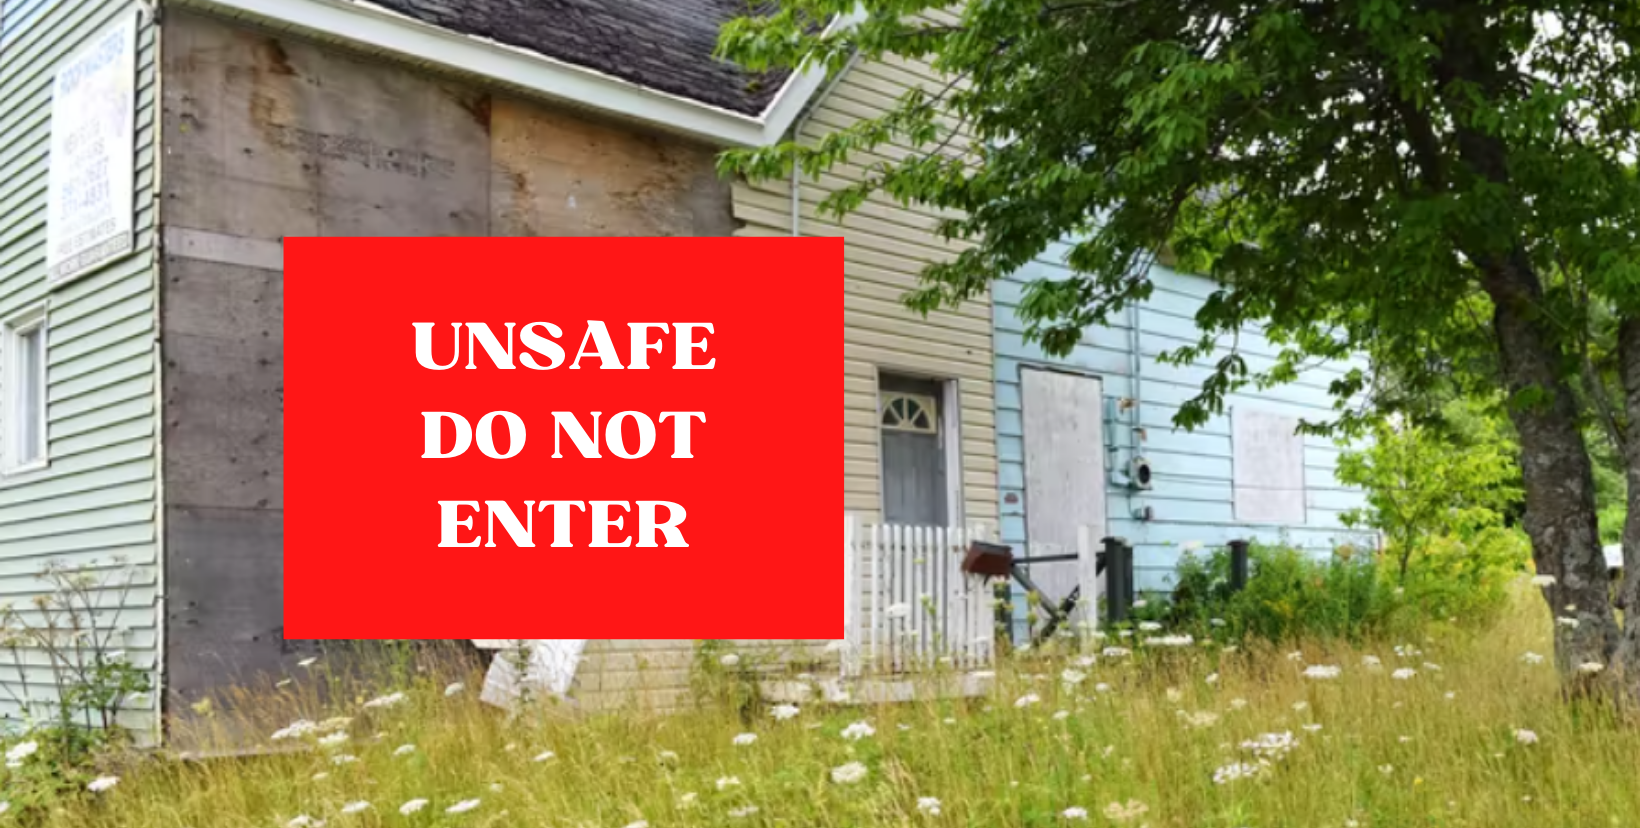 UNSAFE DO NOT ENTER sign in front of condemned house